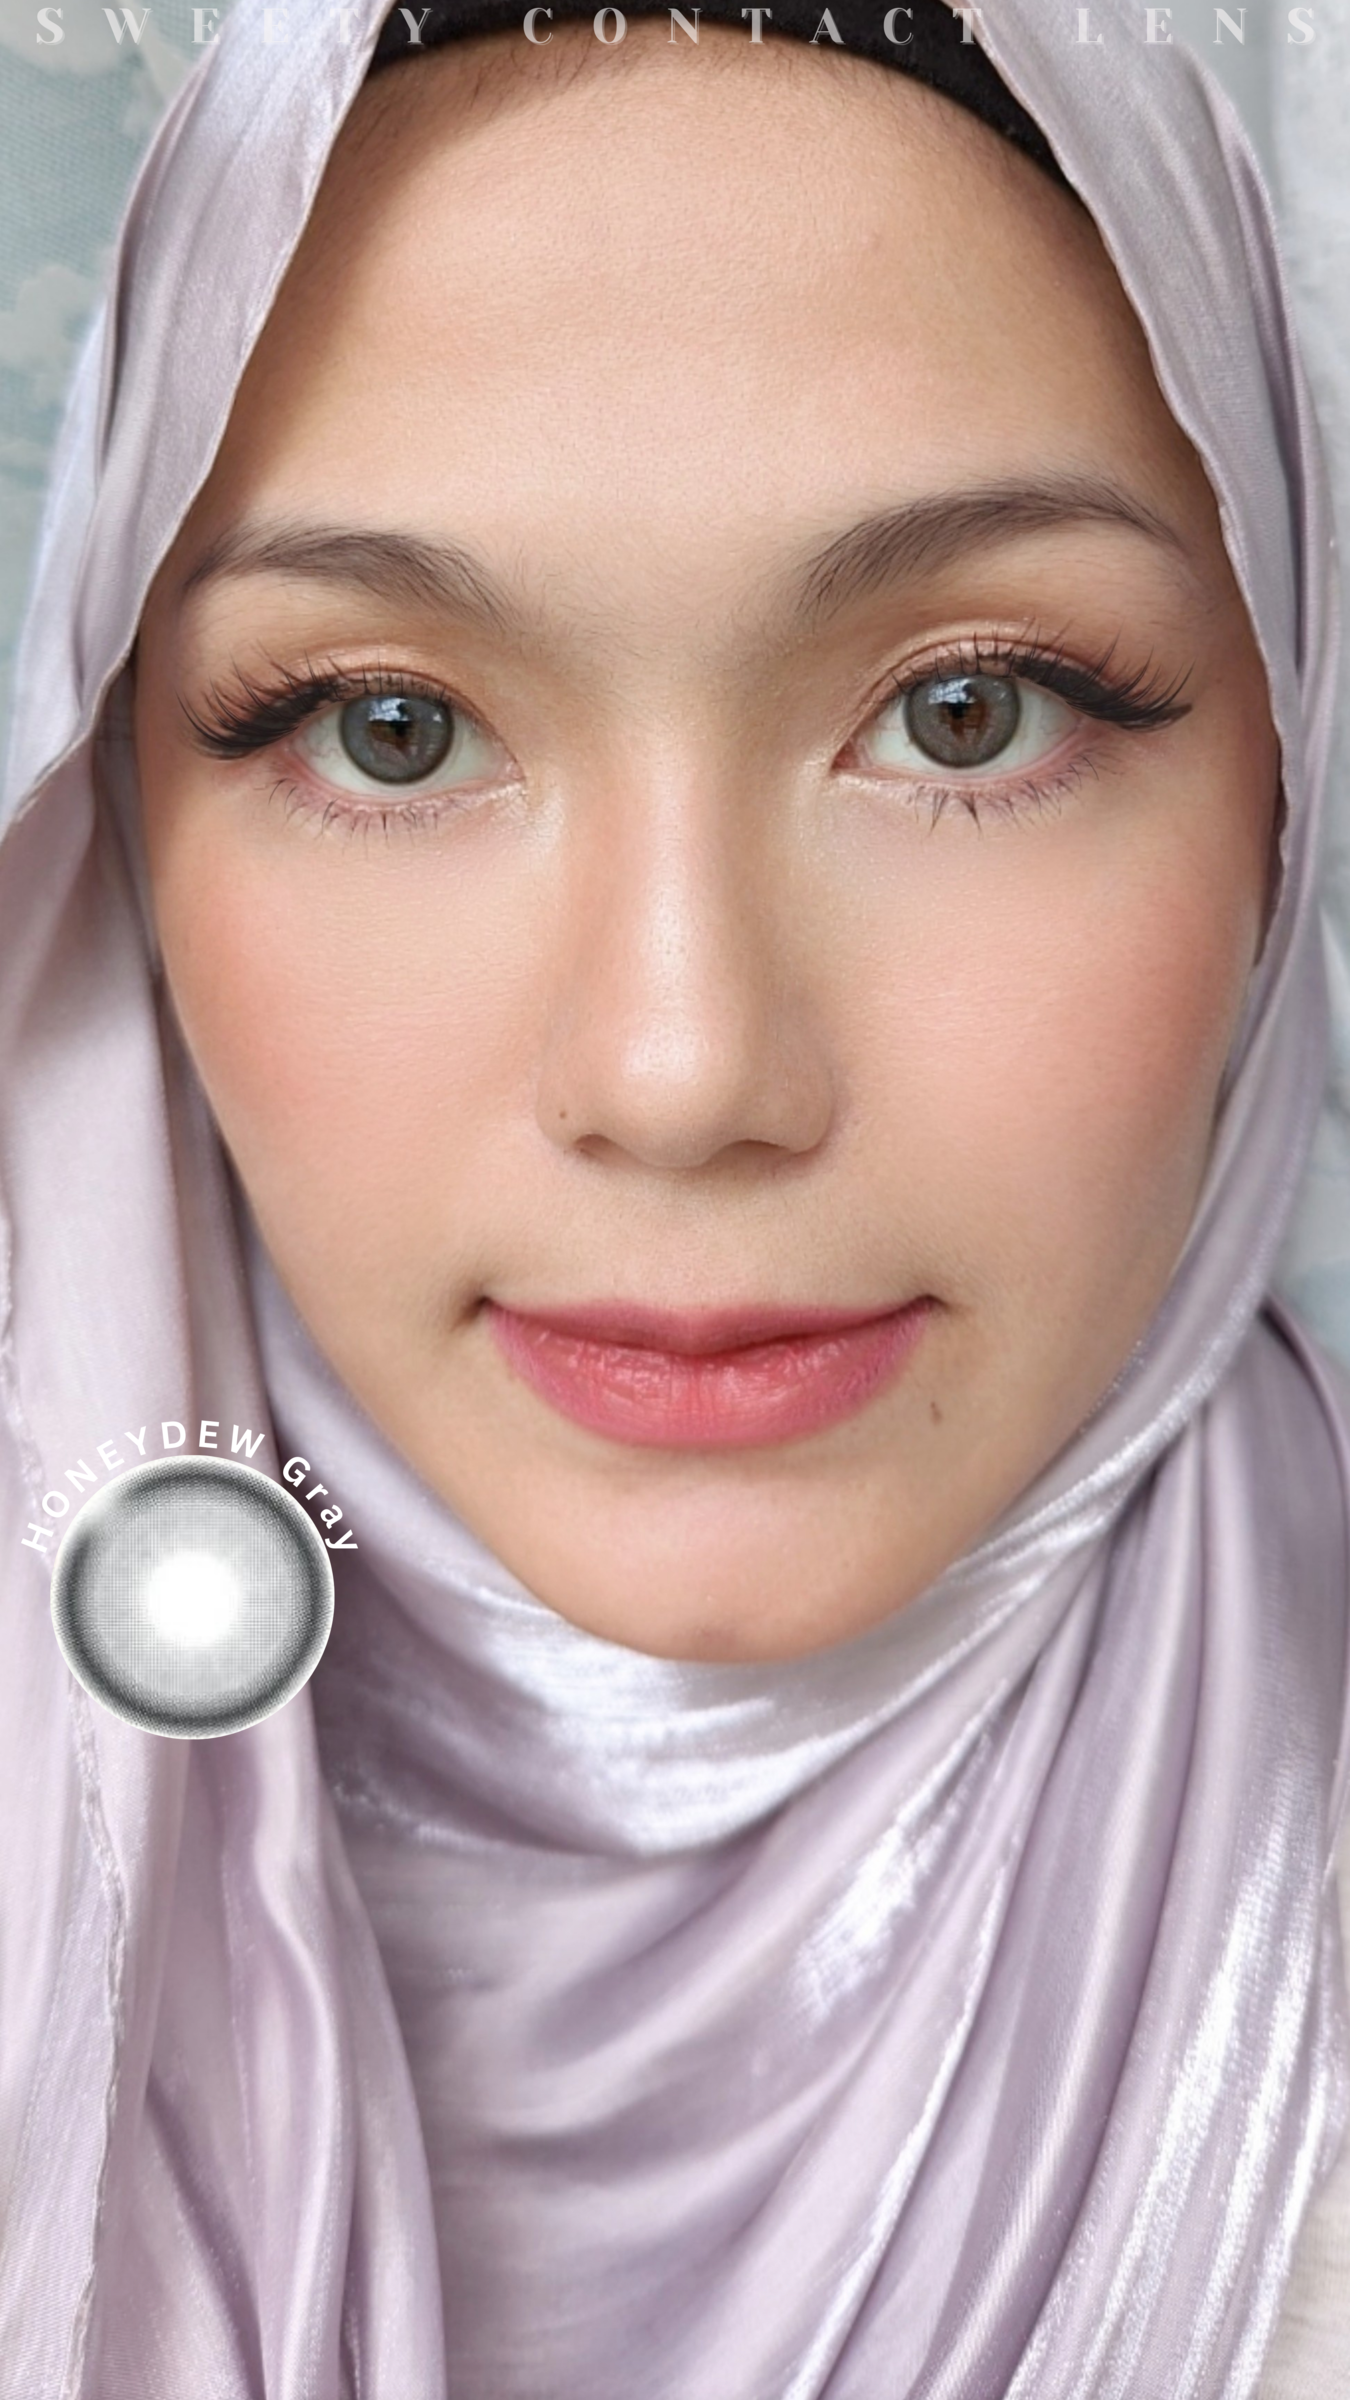 SWEETY CONTACT LENS (Your Story)_20240206_145059_0000